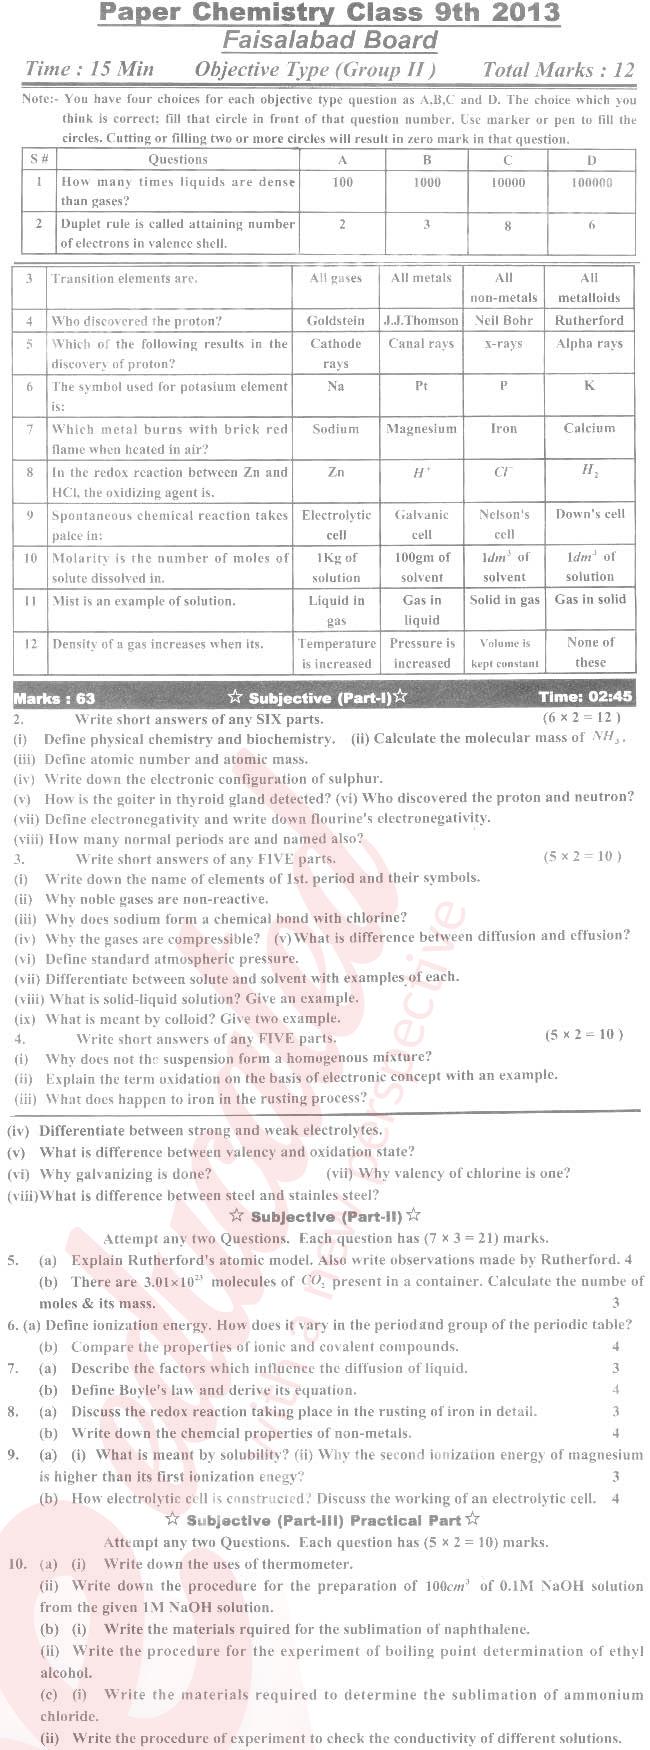 Chemistry 9th class Past Paper Group 2 BISE Faisalabad 2013